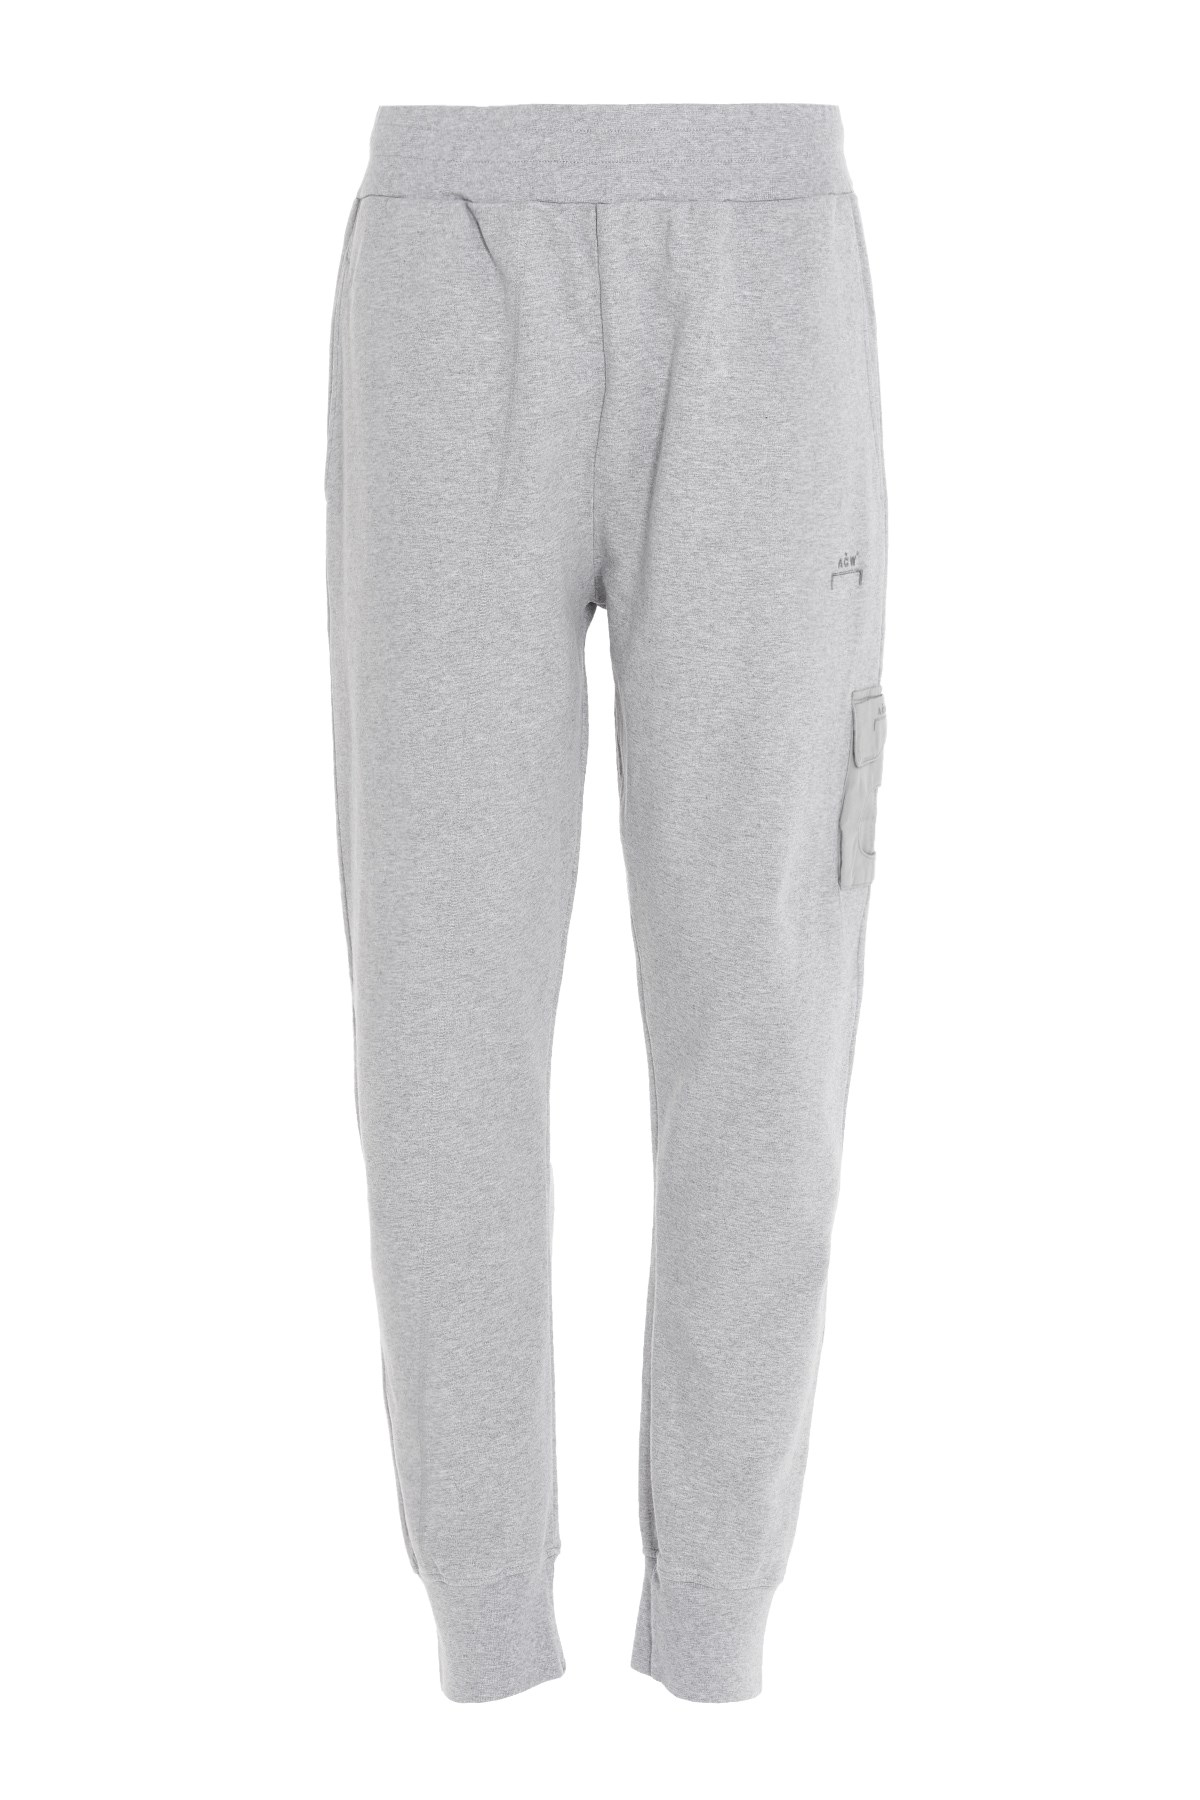 A-COLD-WALL* 'Essential’ Joggers